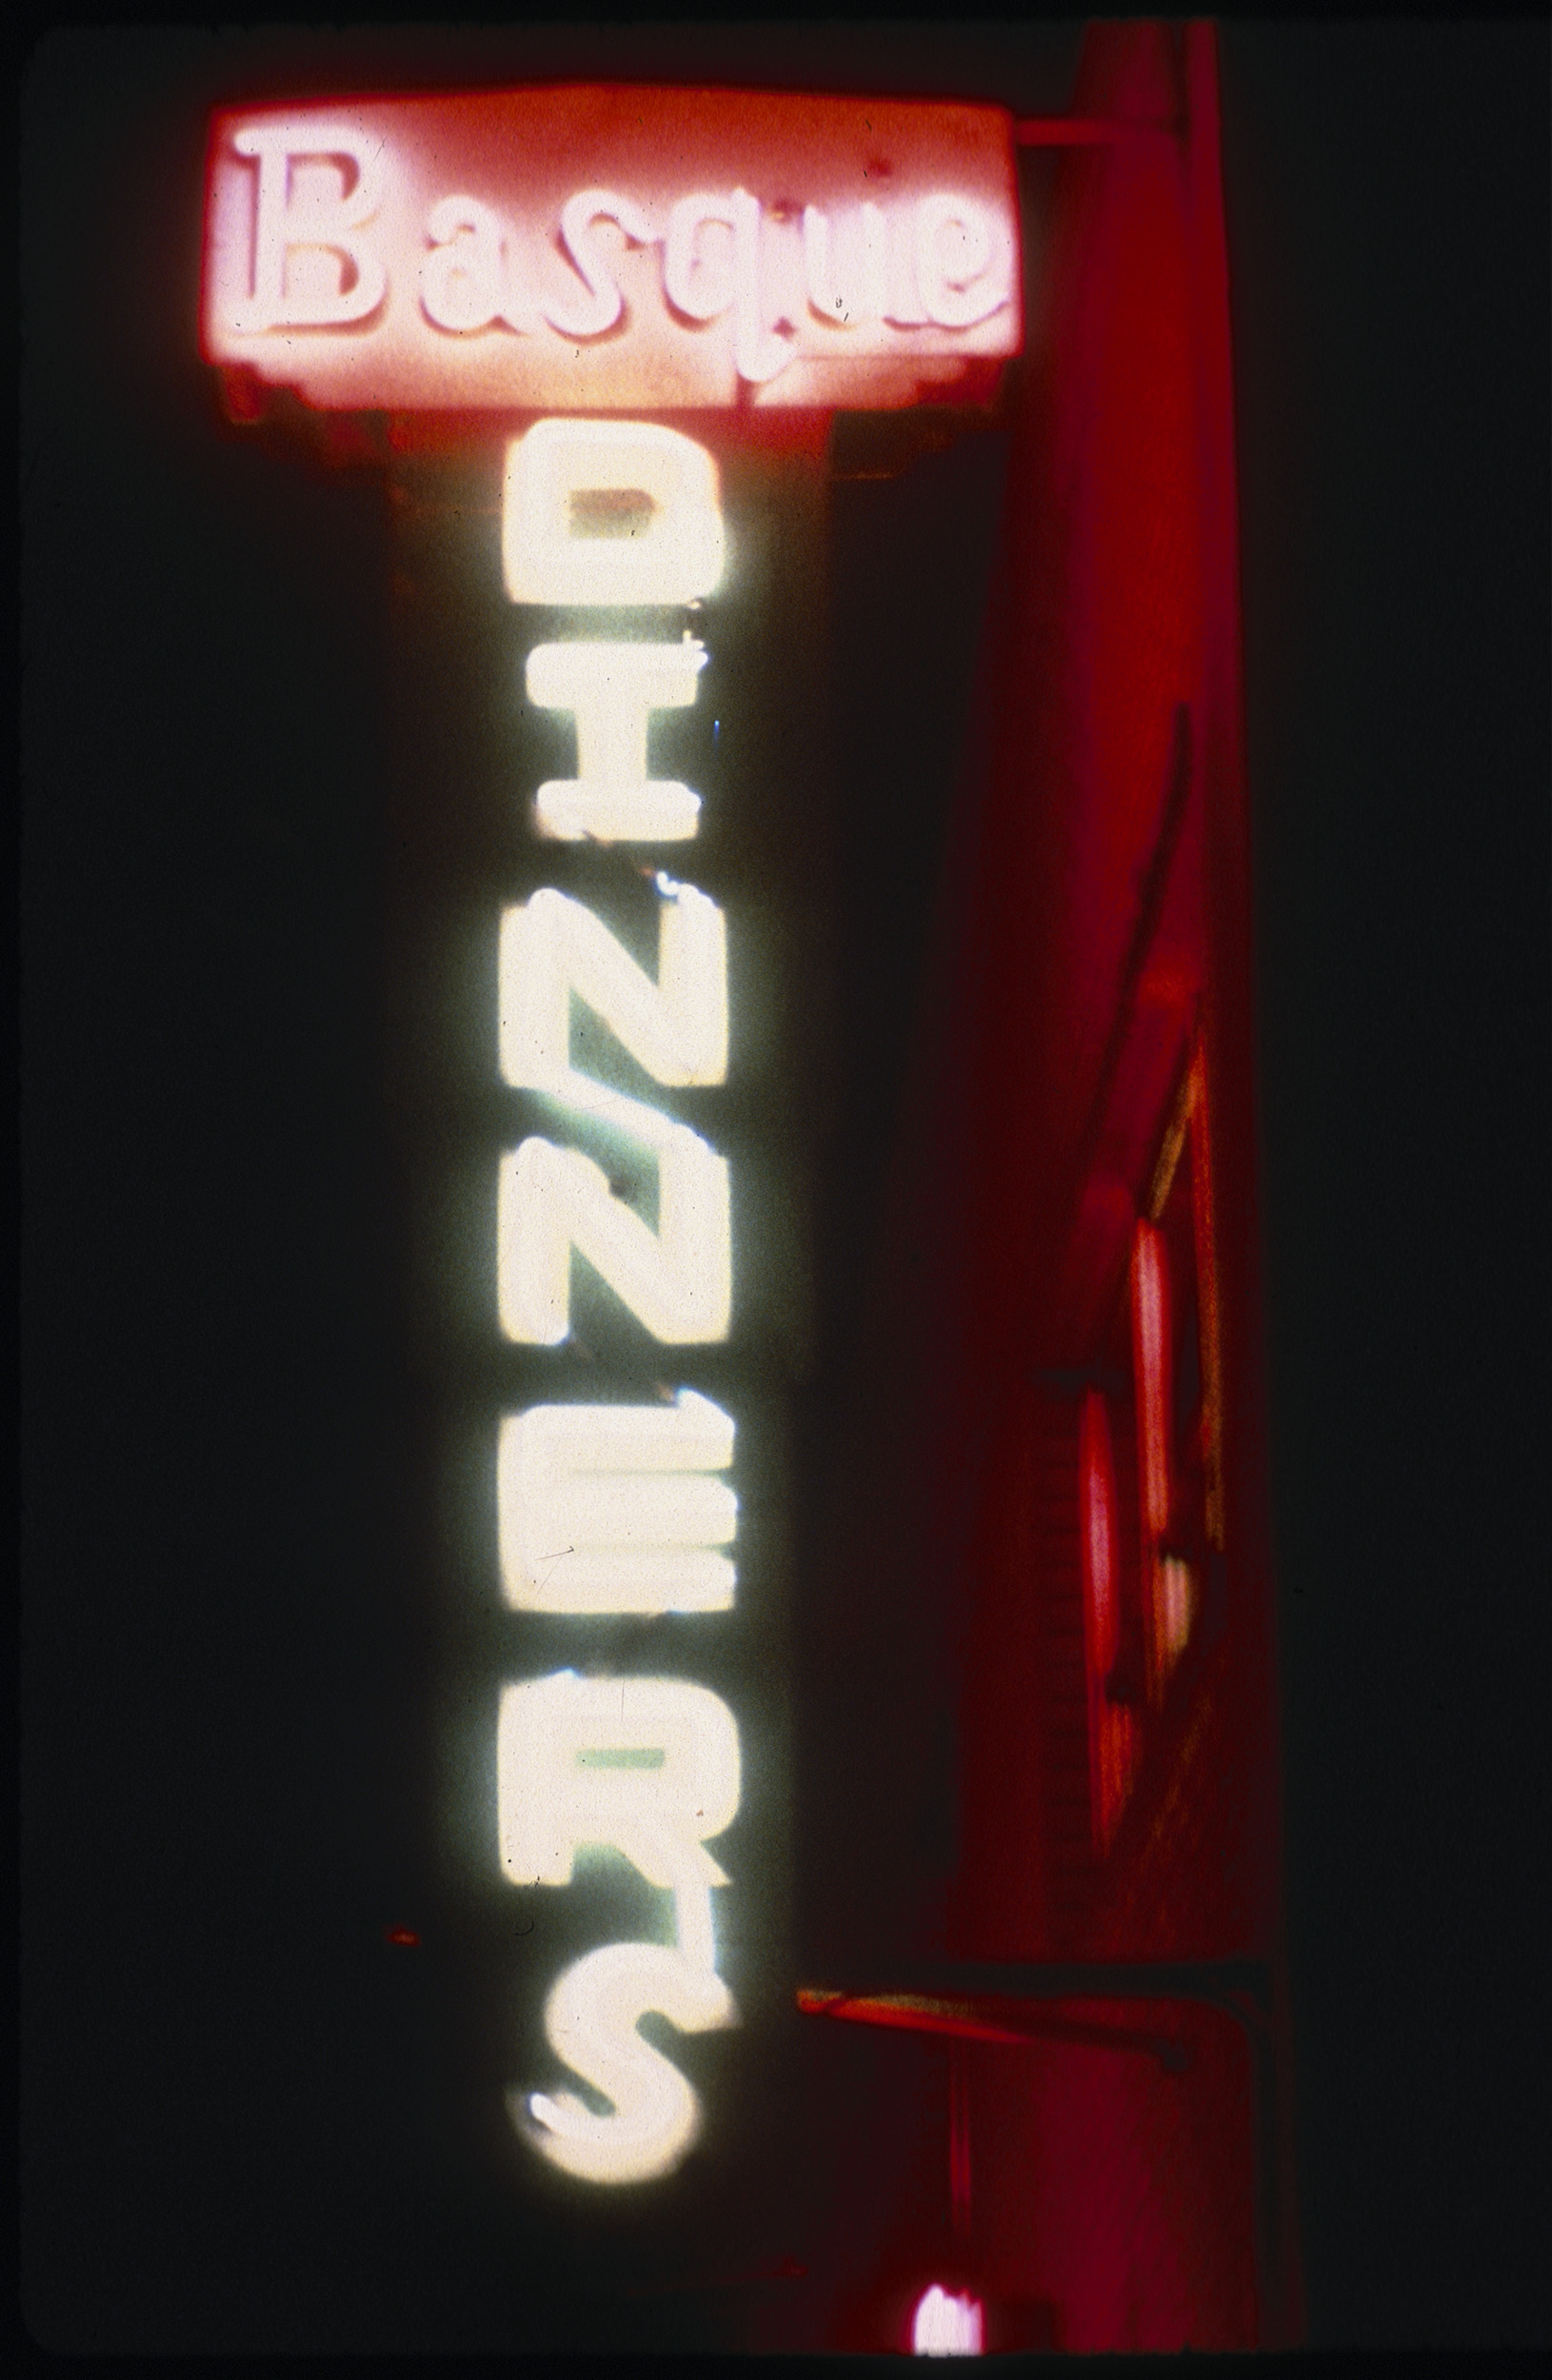 Slide of the Basque Dinners neon sign for the Santa Fe Hotel, Reno, Nevada, 1986